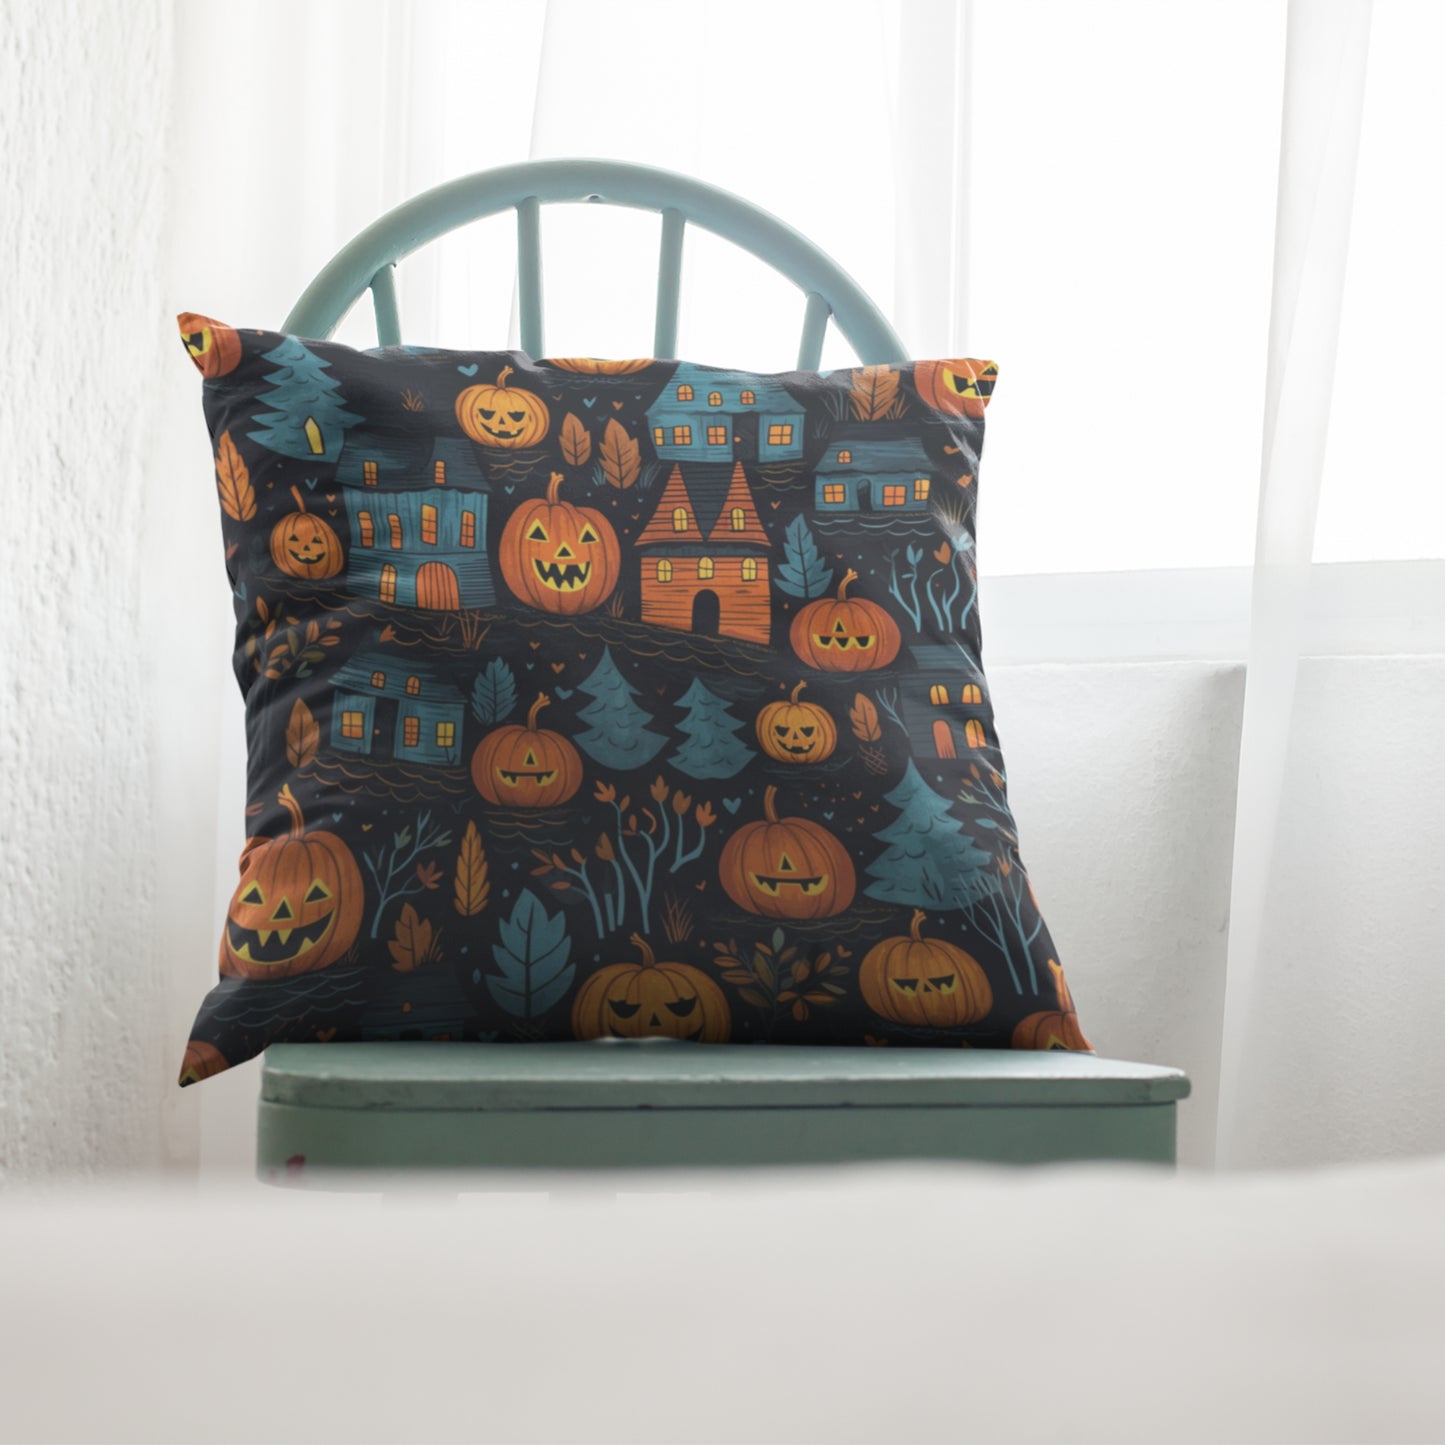 Halloween Throw Pillow, Fall Home Decor Decorative Cushion Cover by Homeezone